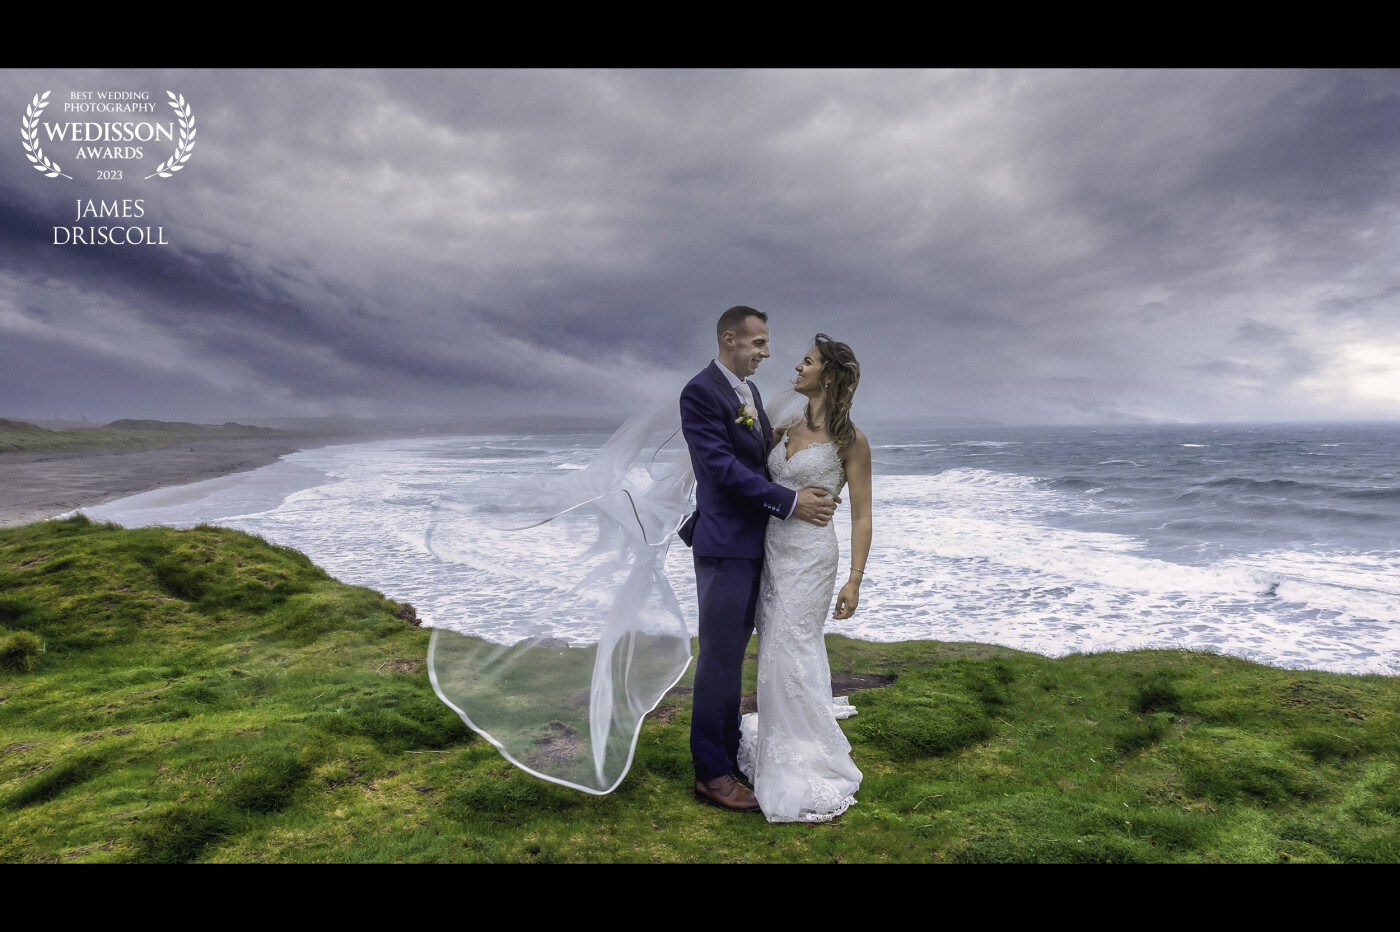 Colin & Cheryl embracing the Irish weather during a storm in west Cork